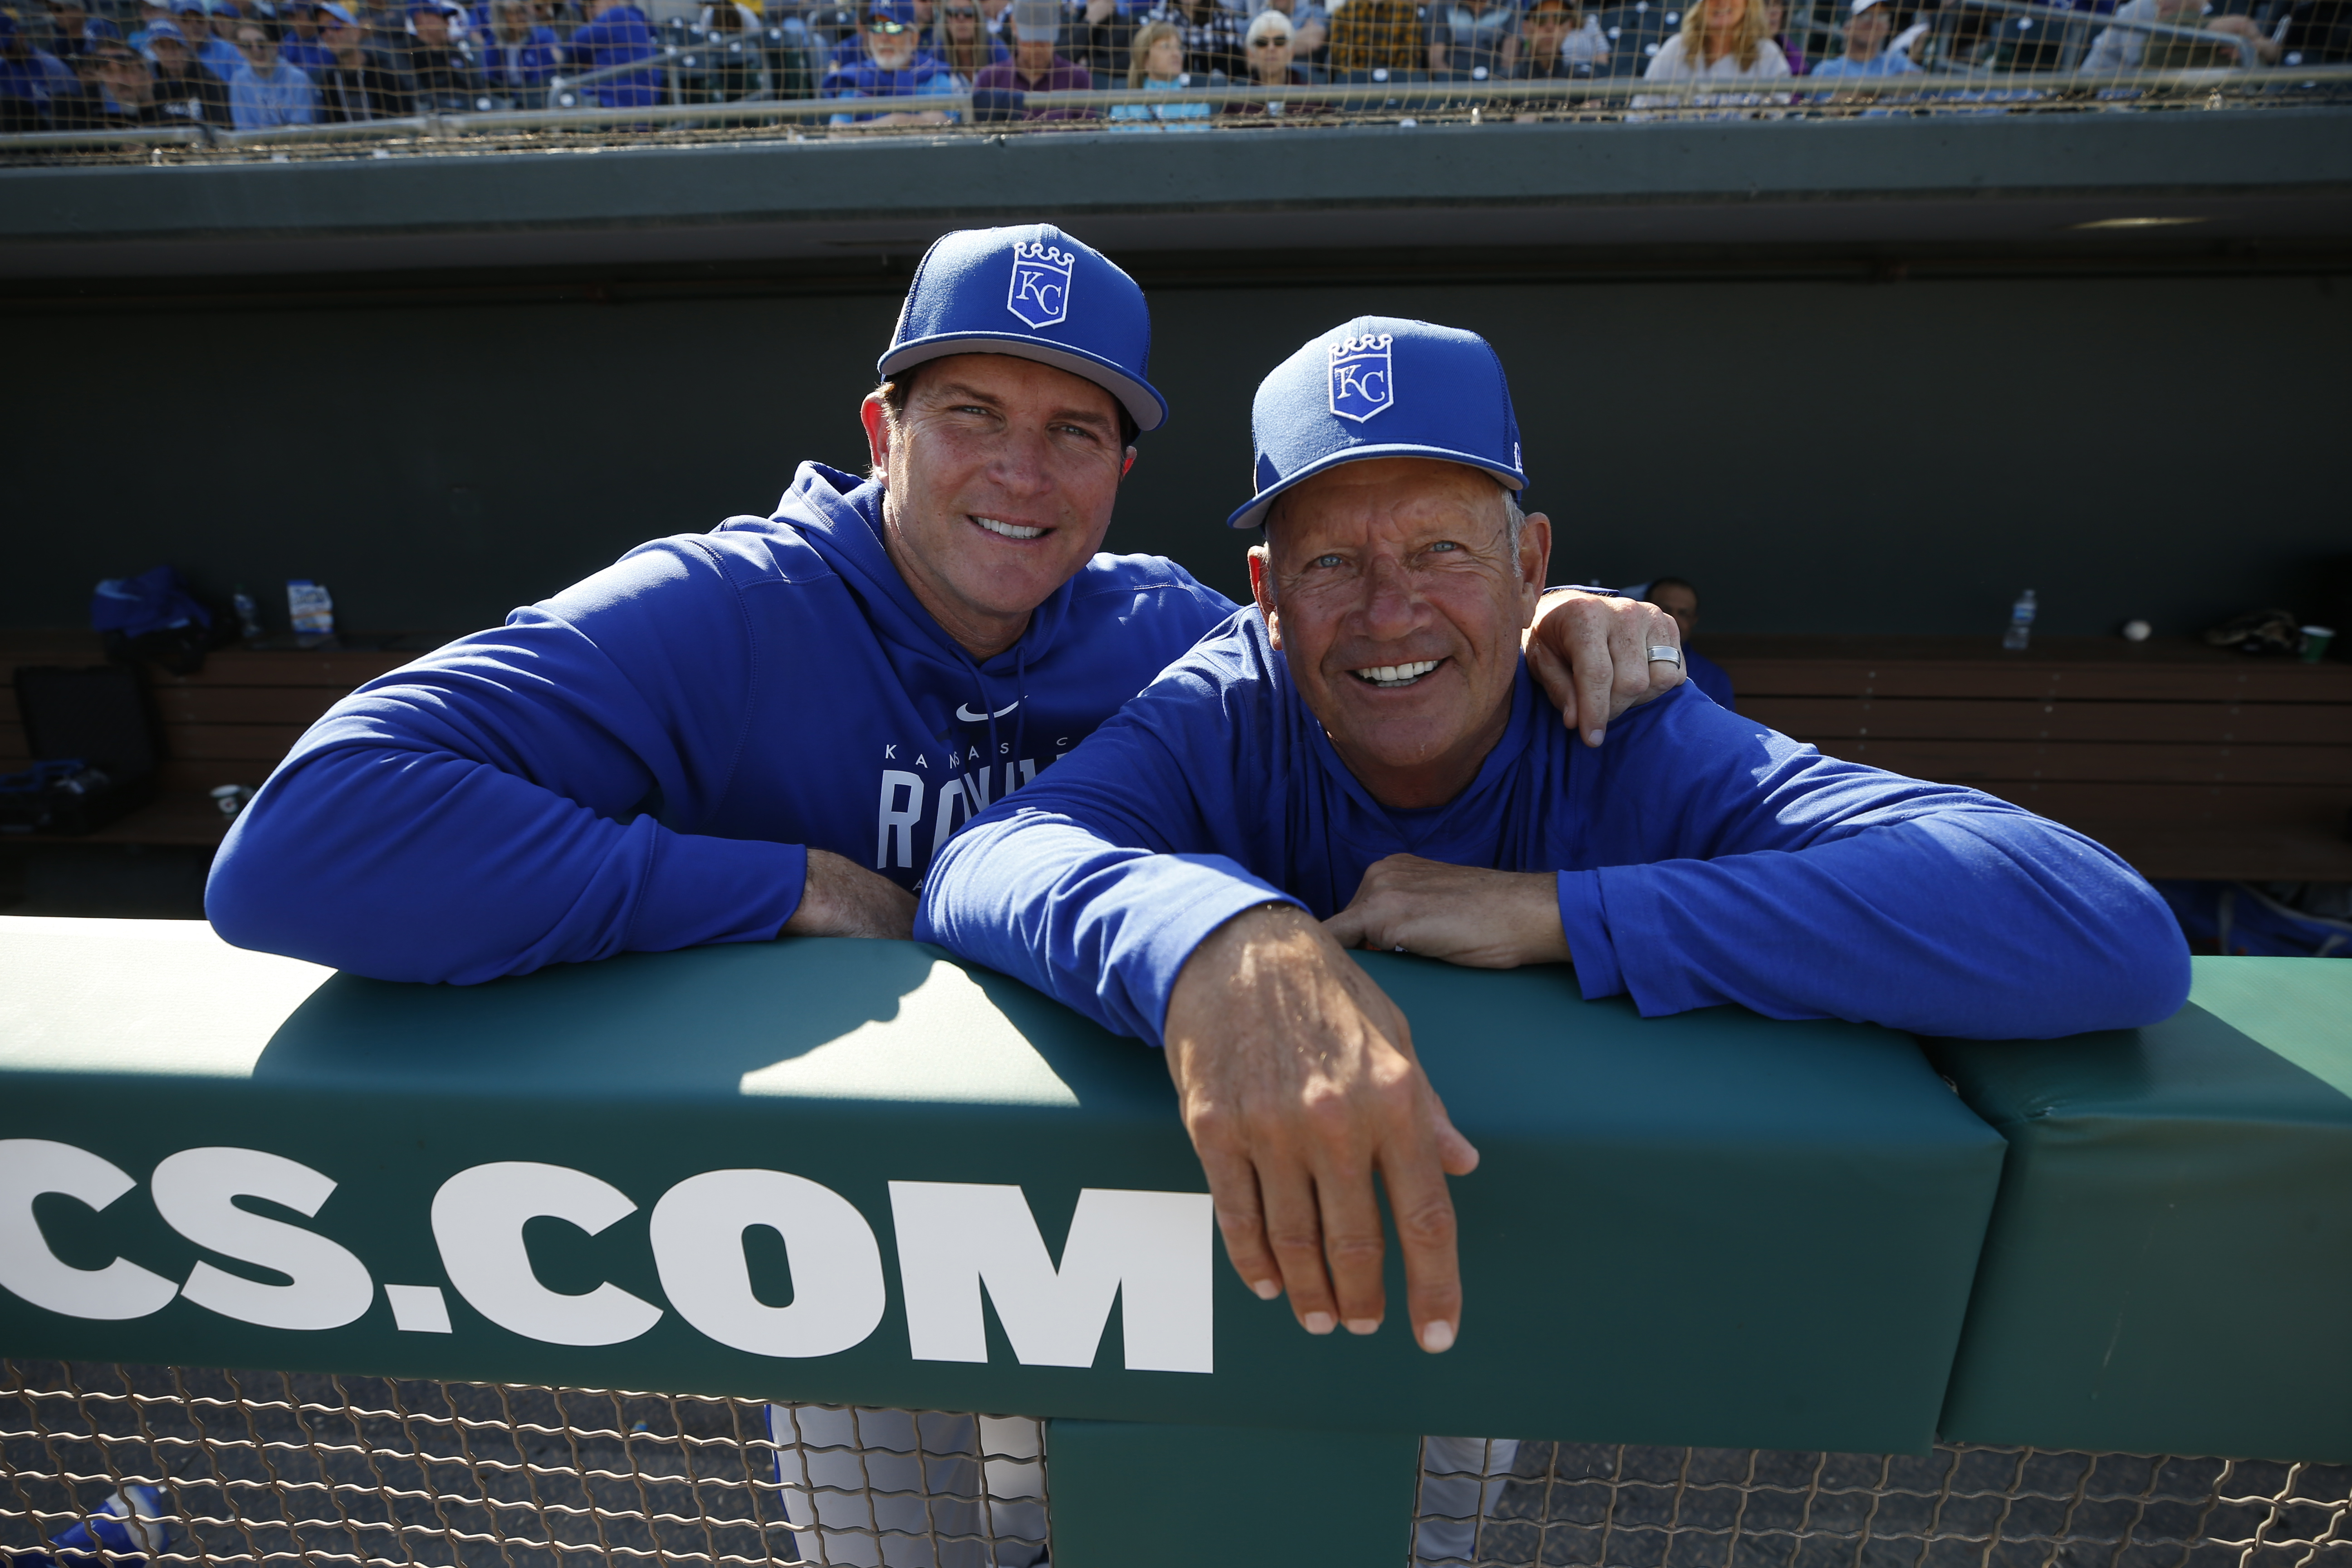 Pitching Coach Brian Sweeney #85 and Vice President of Baseball Operations George Brett of the Kansas City Royals in the dugout during a spring training game against the Oakland Athletics at Hohokam Stadium on March 3, 2023 in Mesa, Arizona. The Royals defeated the Athletics 6-4.